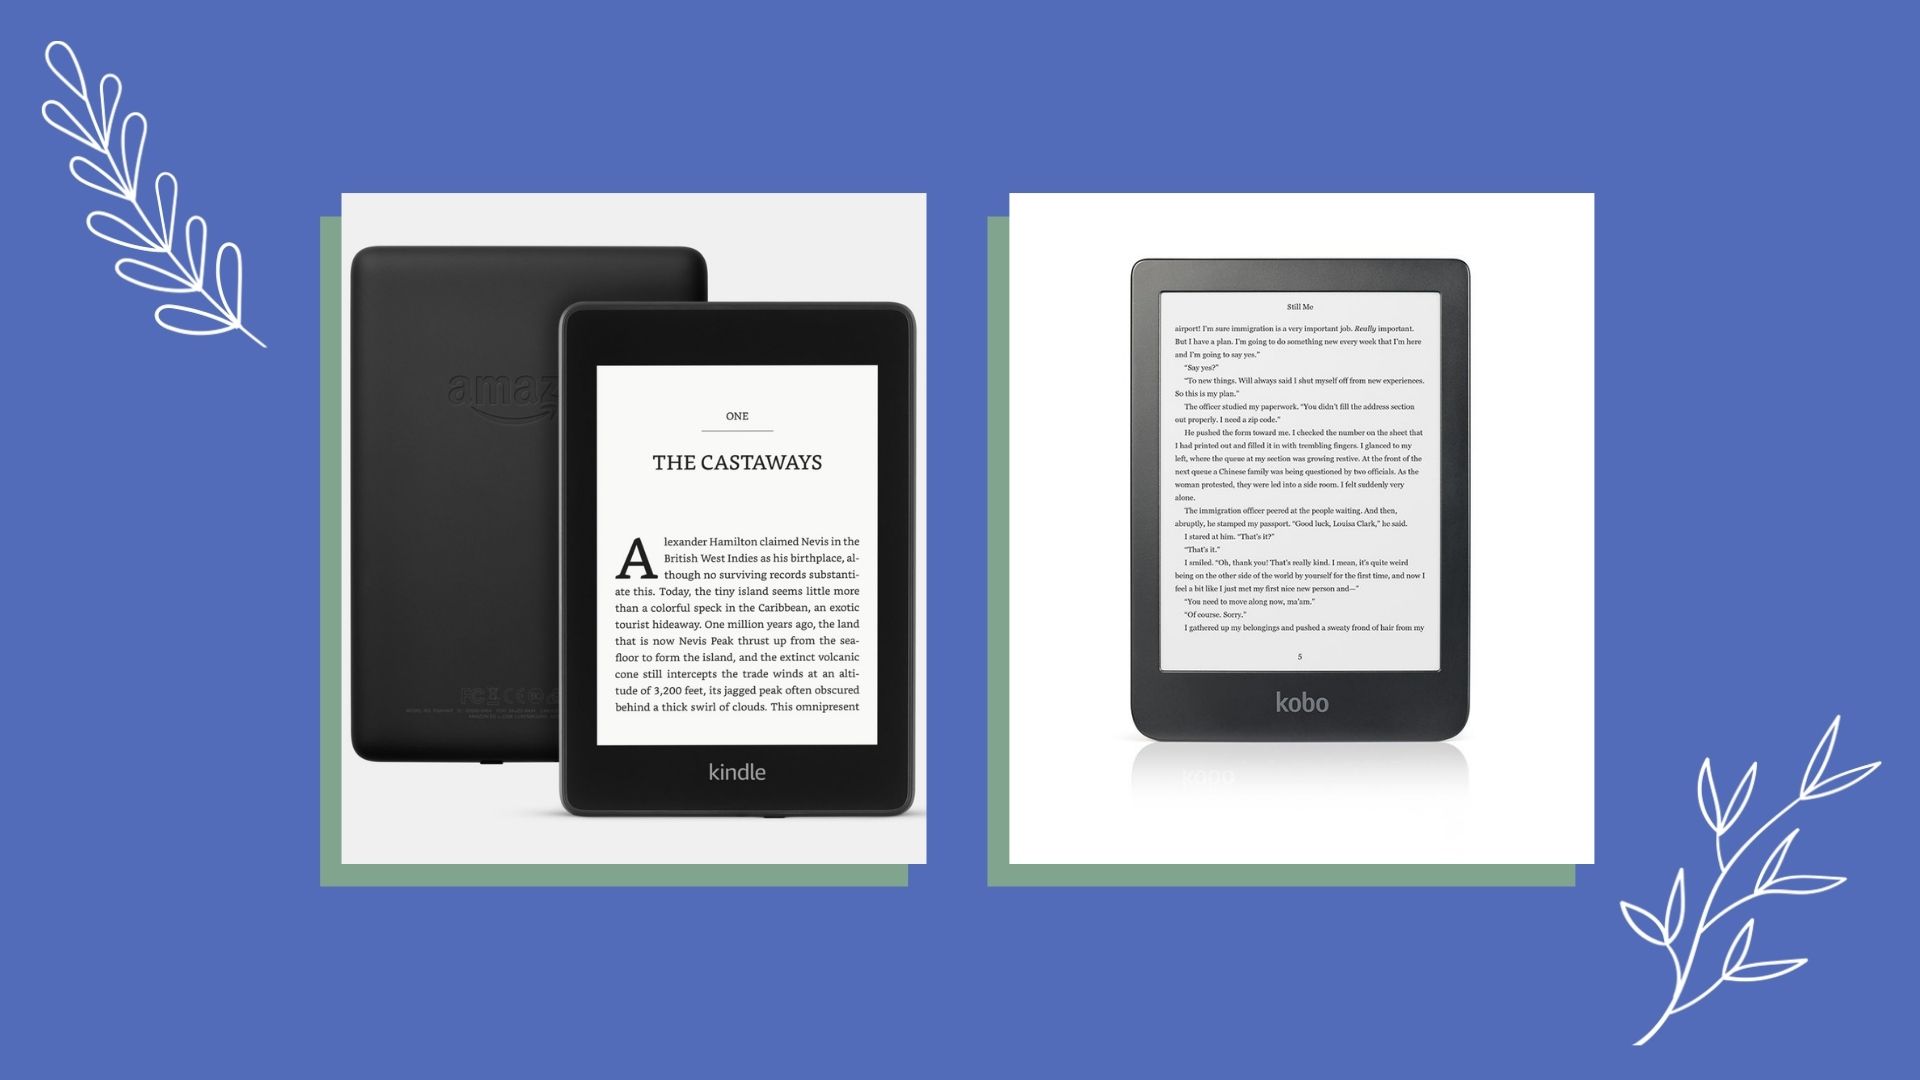 Kobo Nia review: an affordable alternative to the Kindle ereader